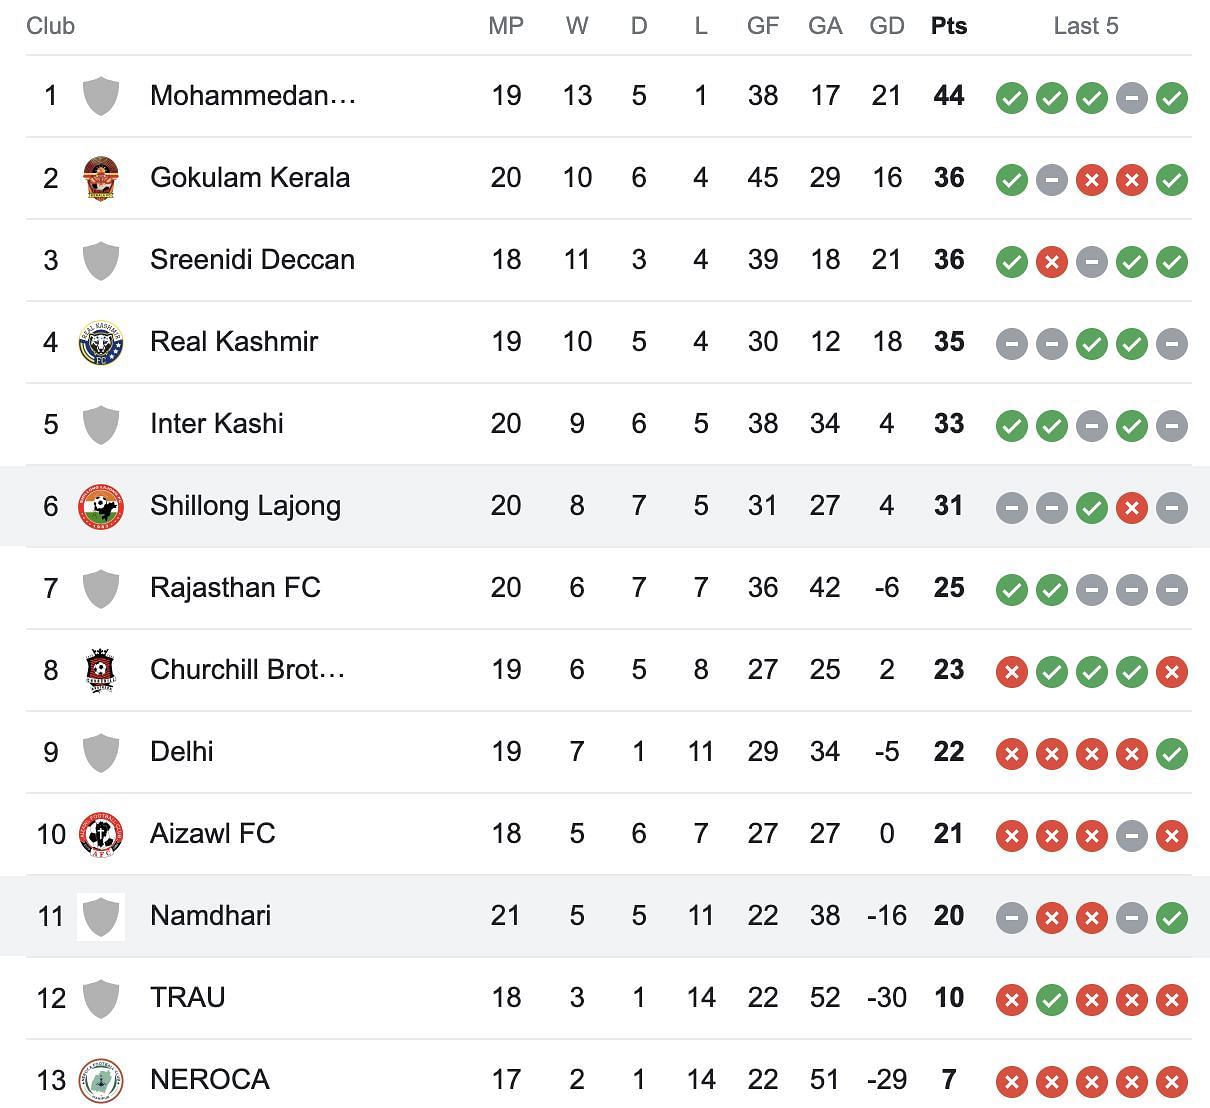 A look at the standings after the conclusion of Namdhari vs Shillong Lajong game.